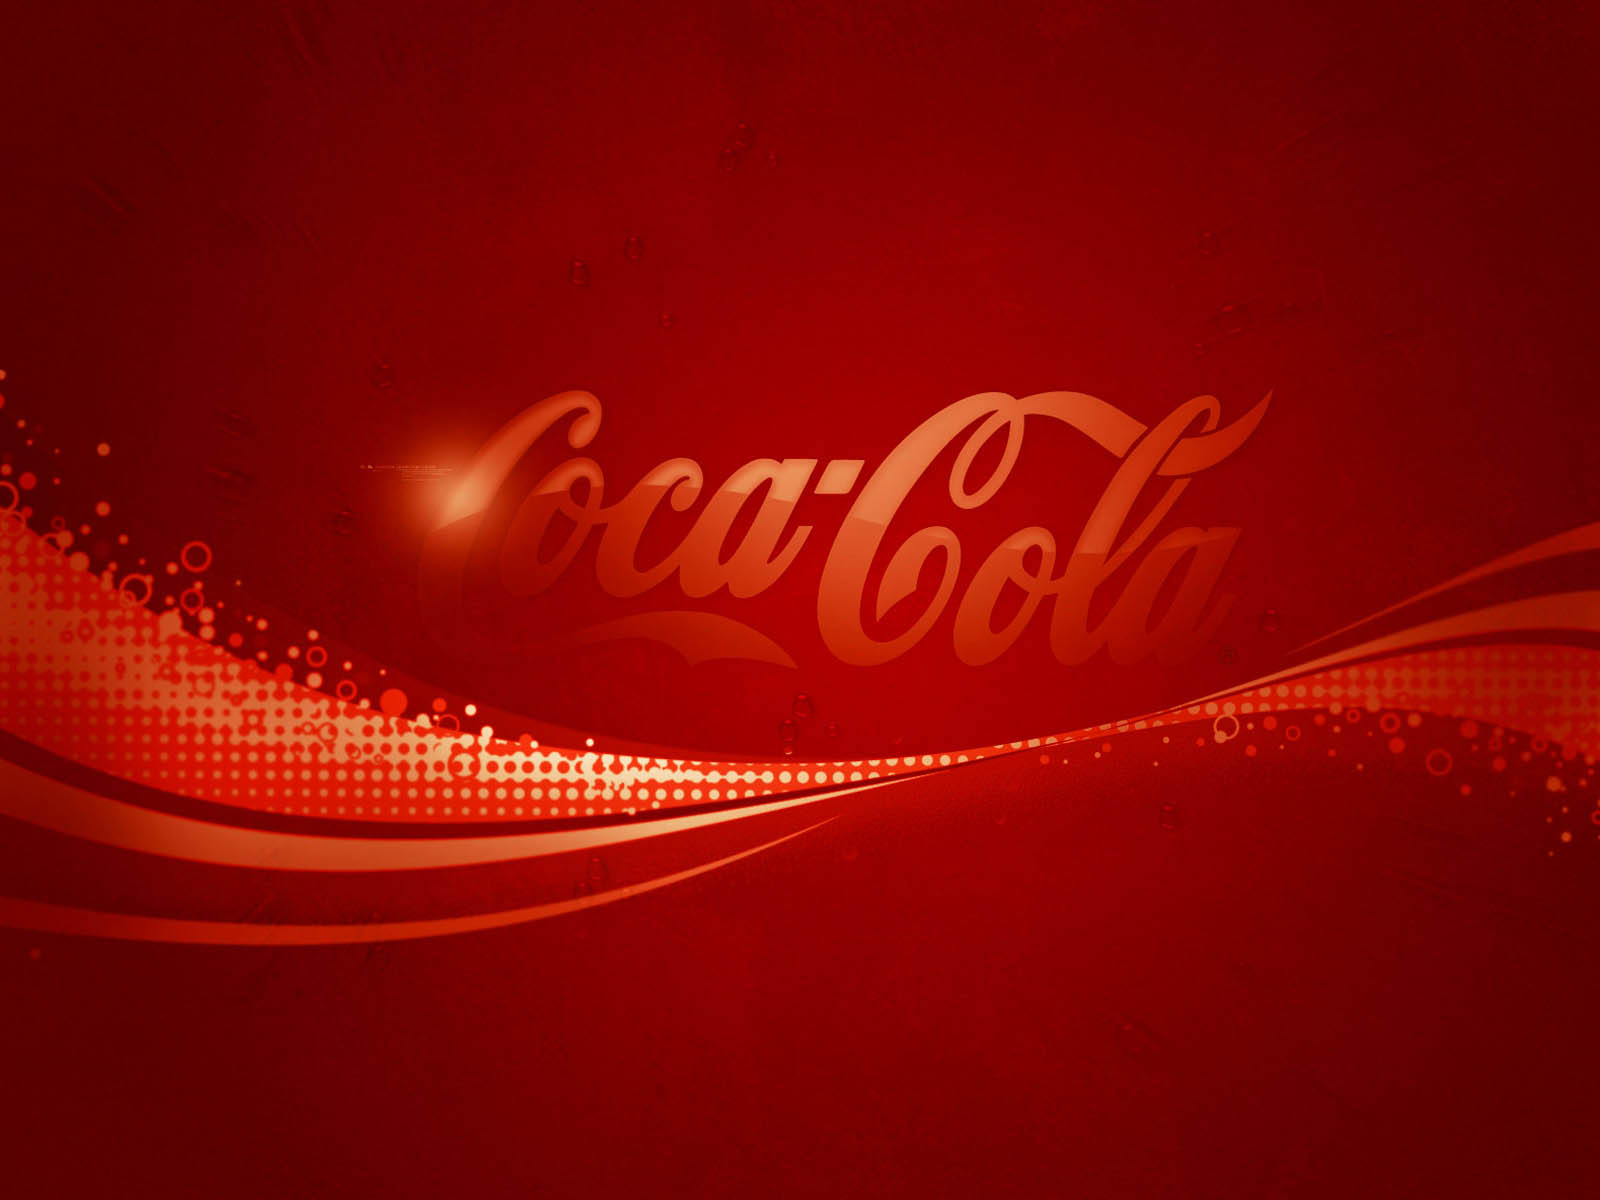 Read This Article Coca Cola Logo With The Title Wallpaper